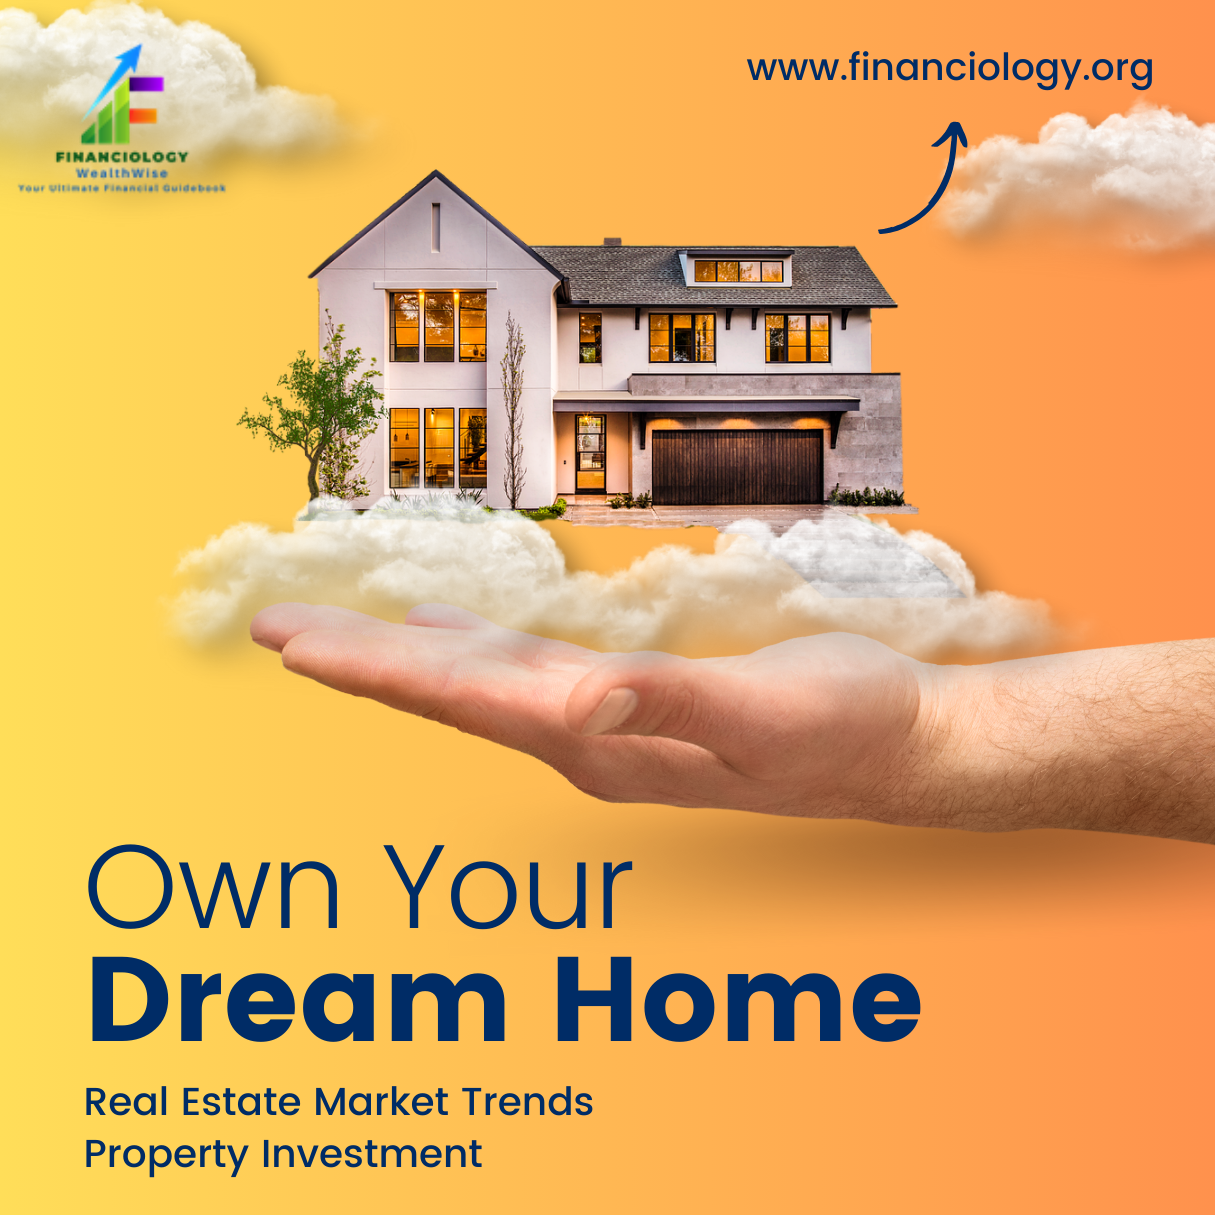 Real Estate Market Trends | Property Investment | Home Buying Process | Mortgages and Real Estate